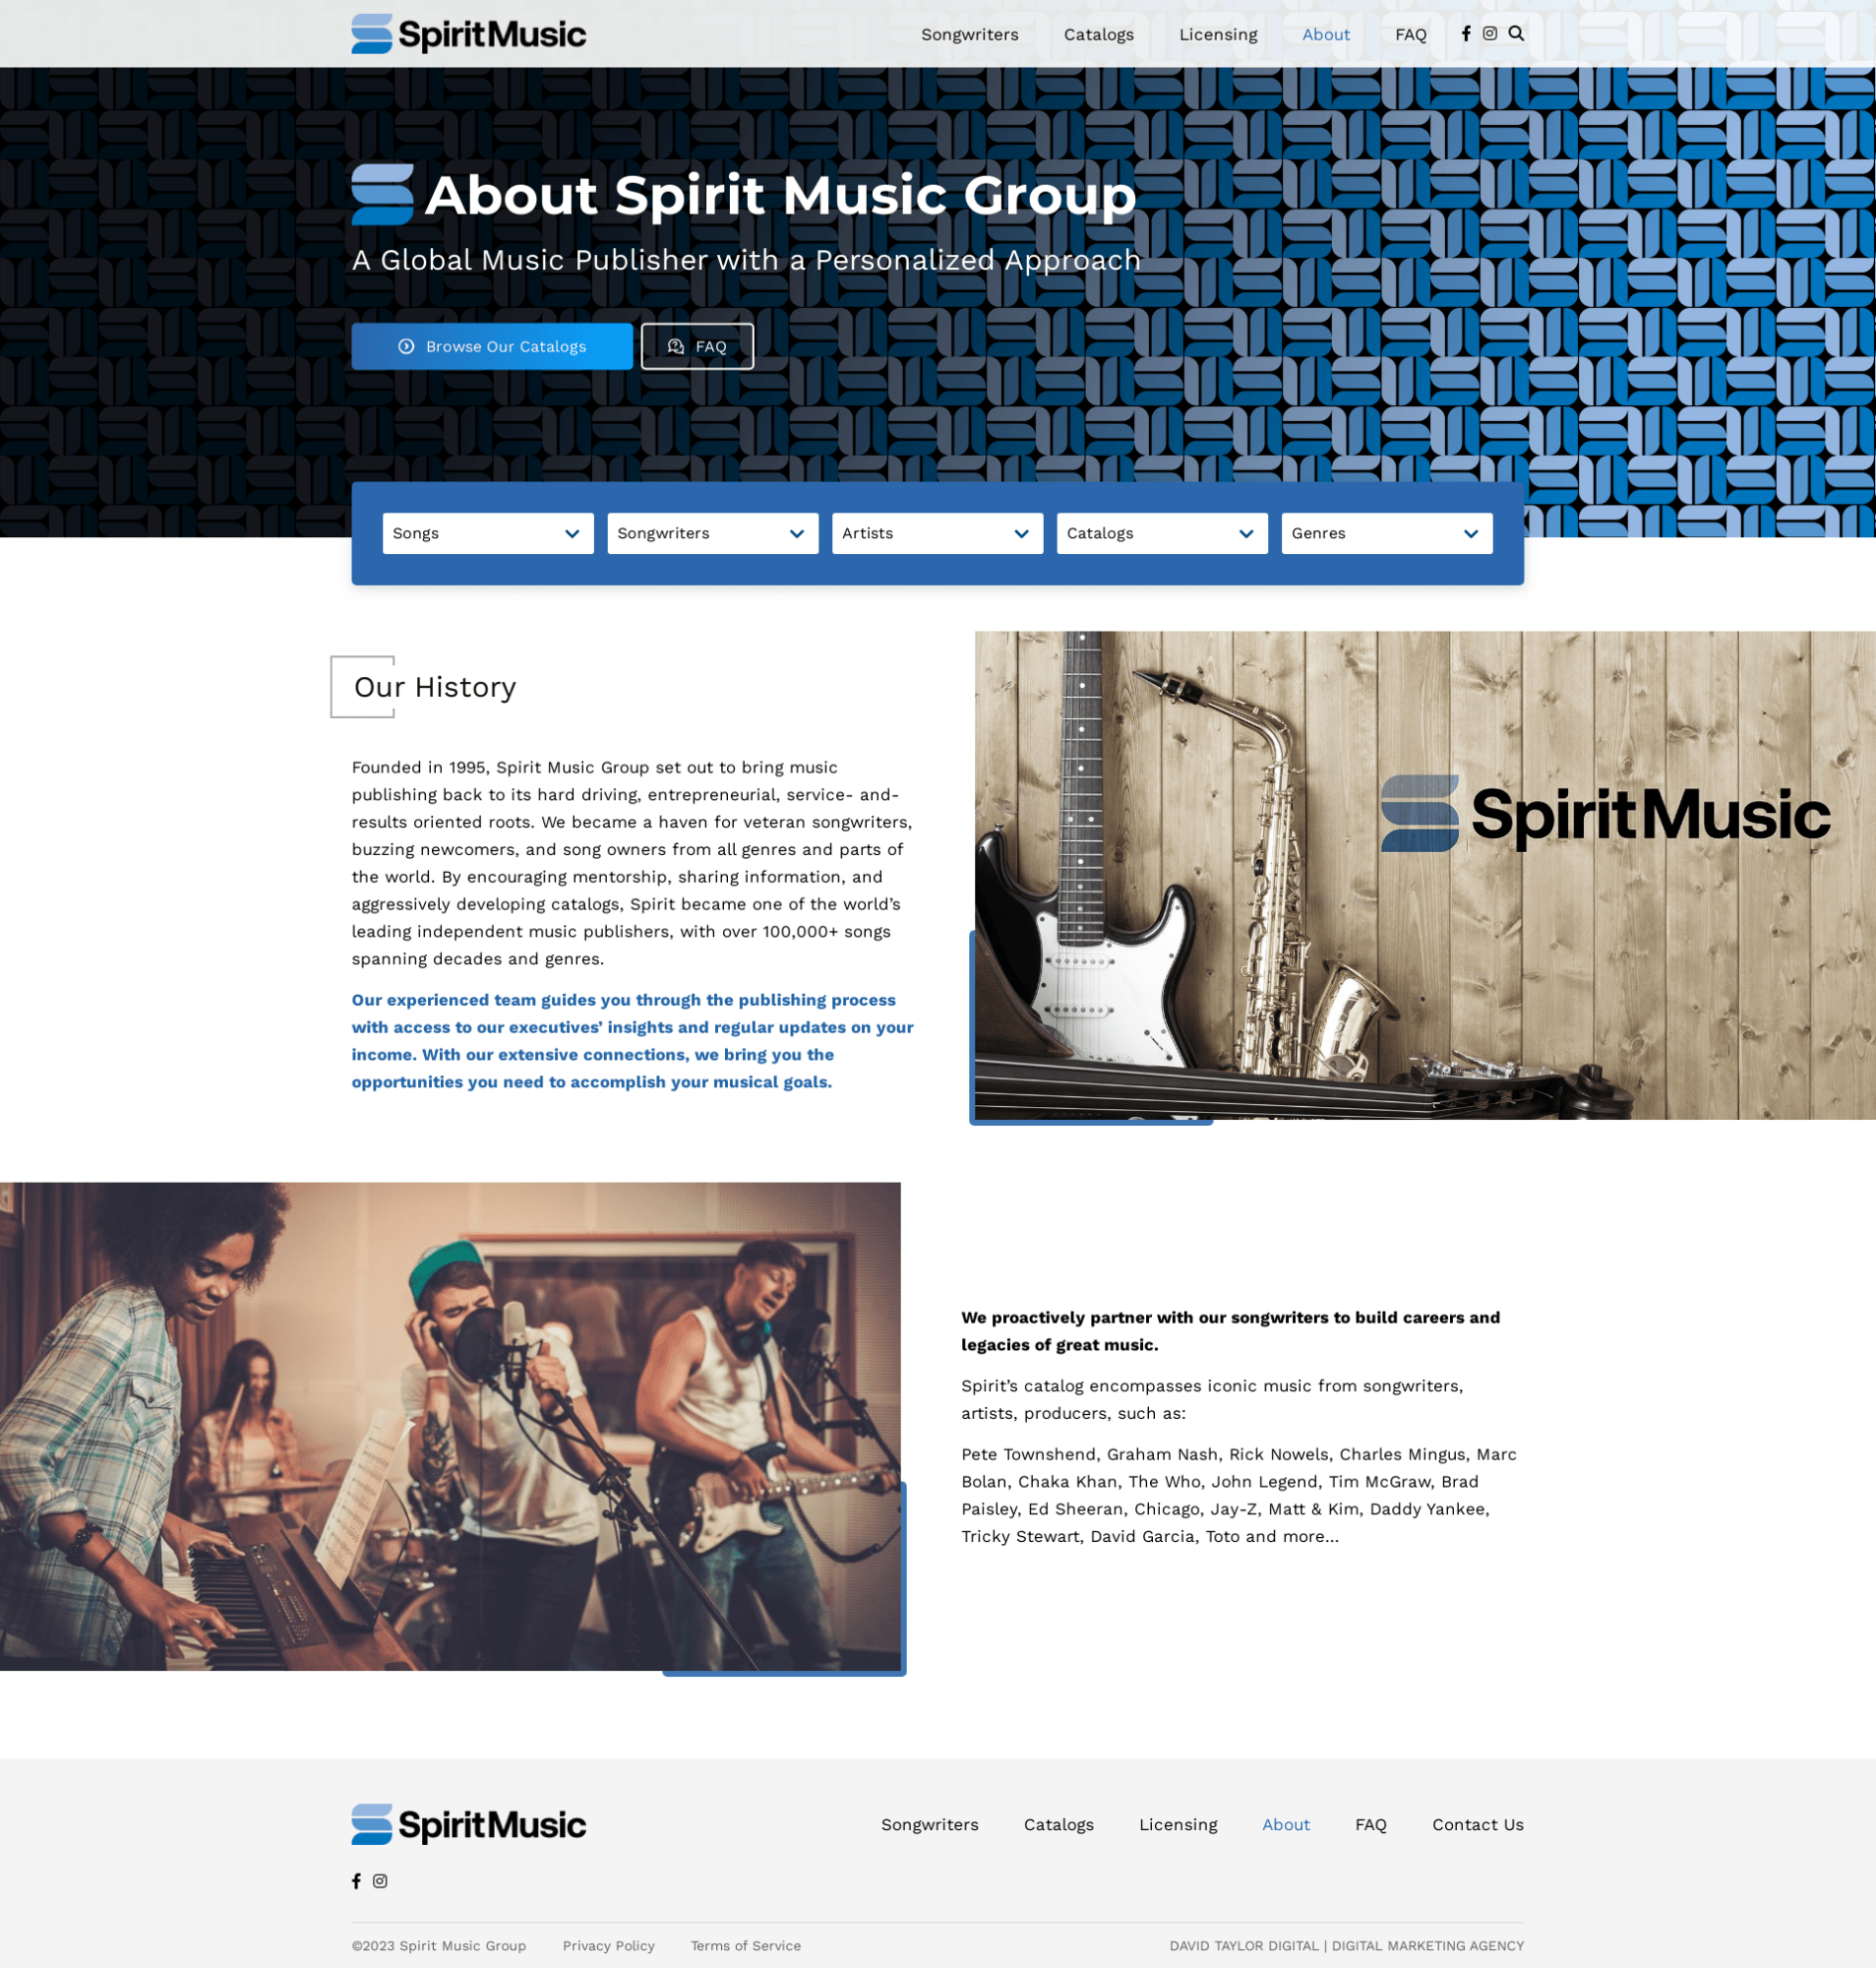 Spirit Music Group - About View